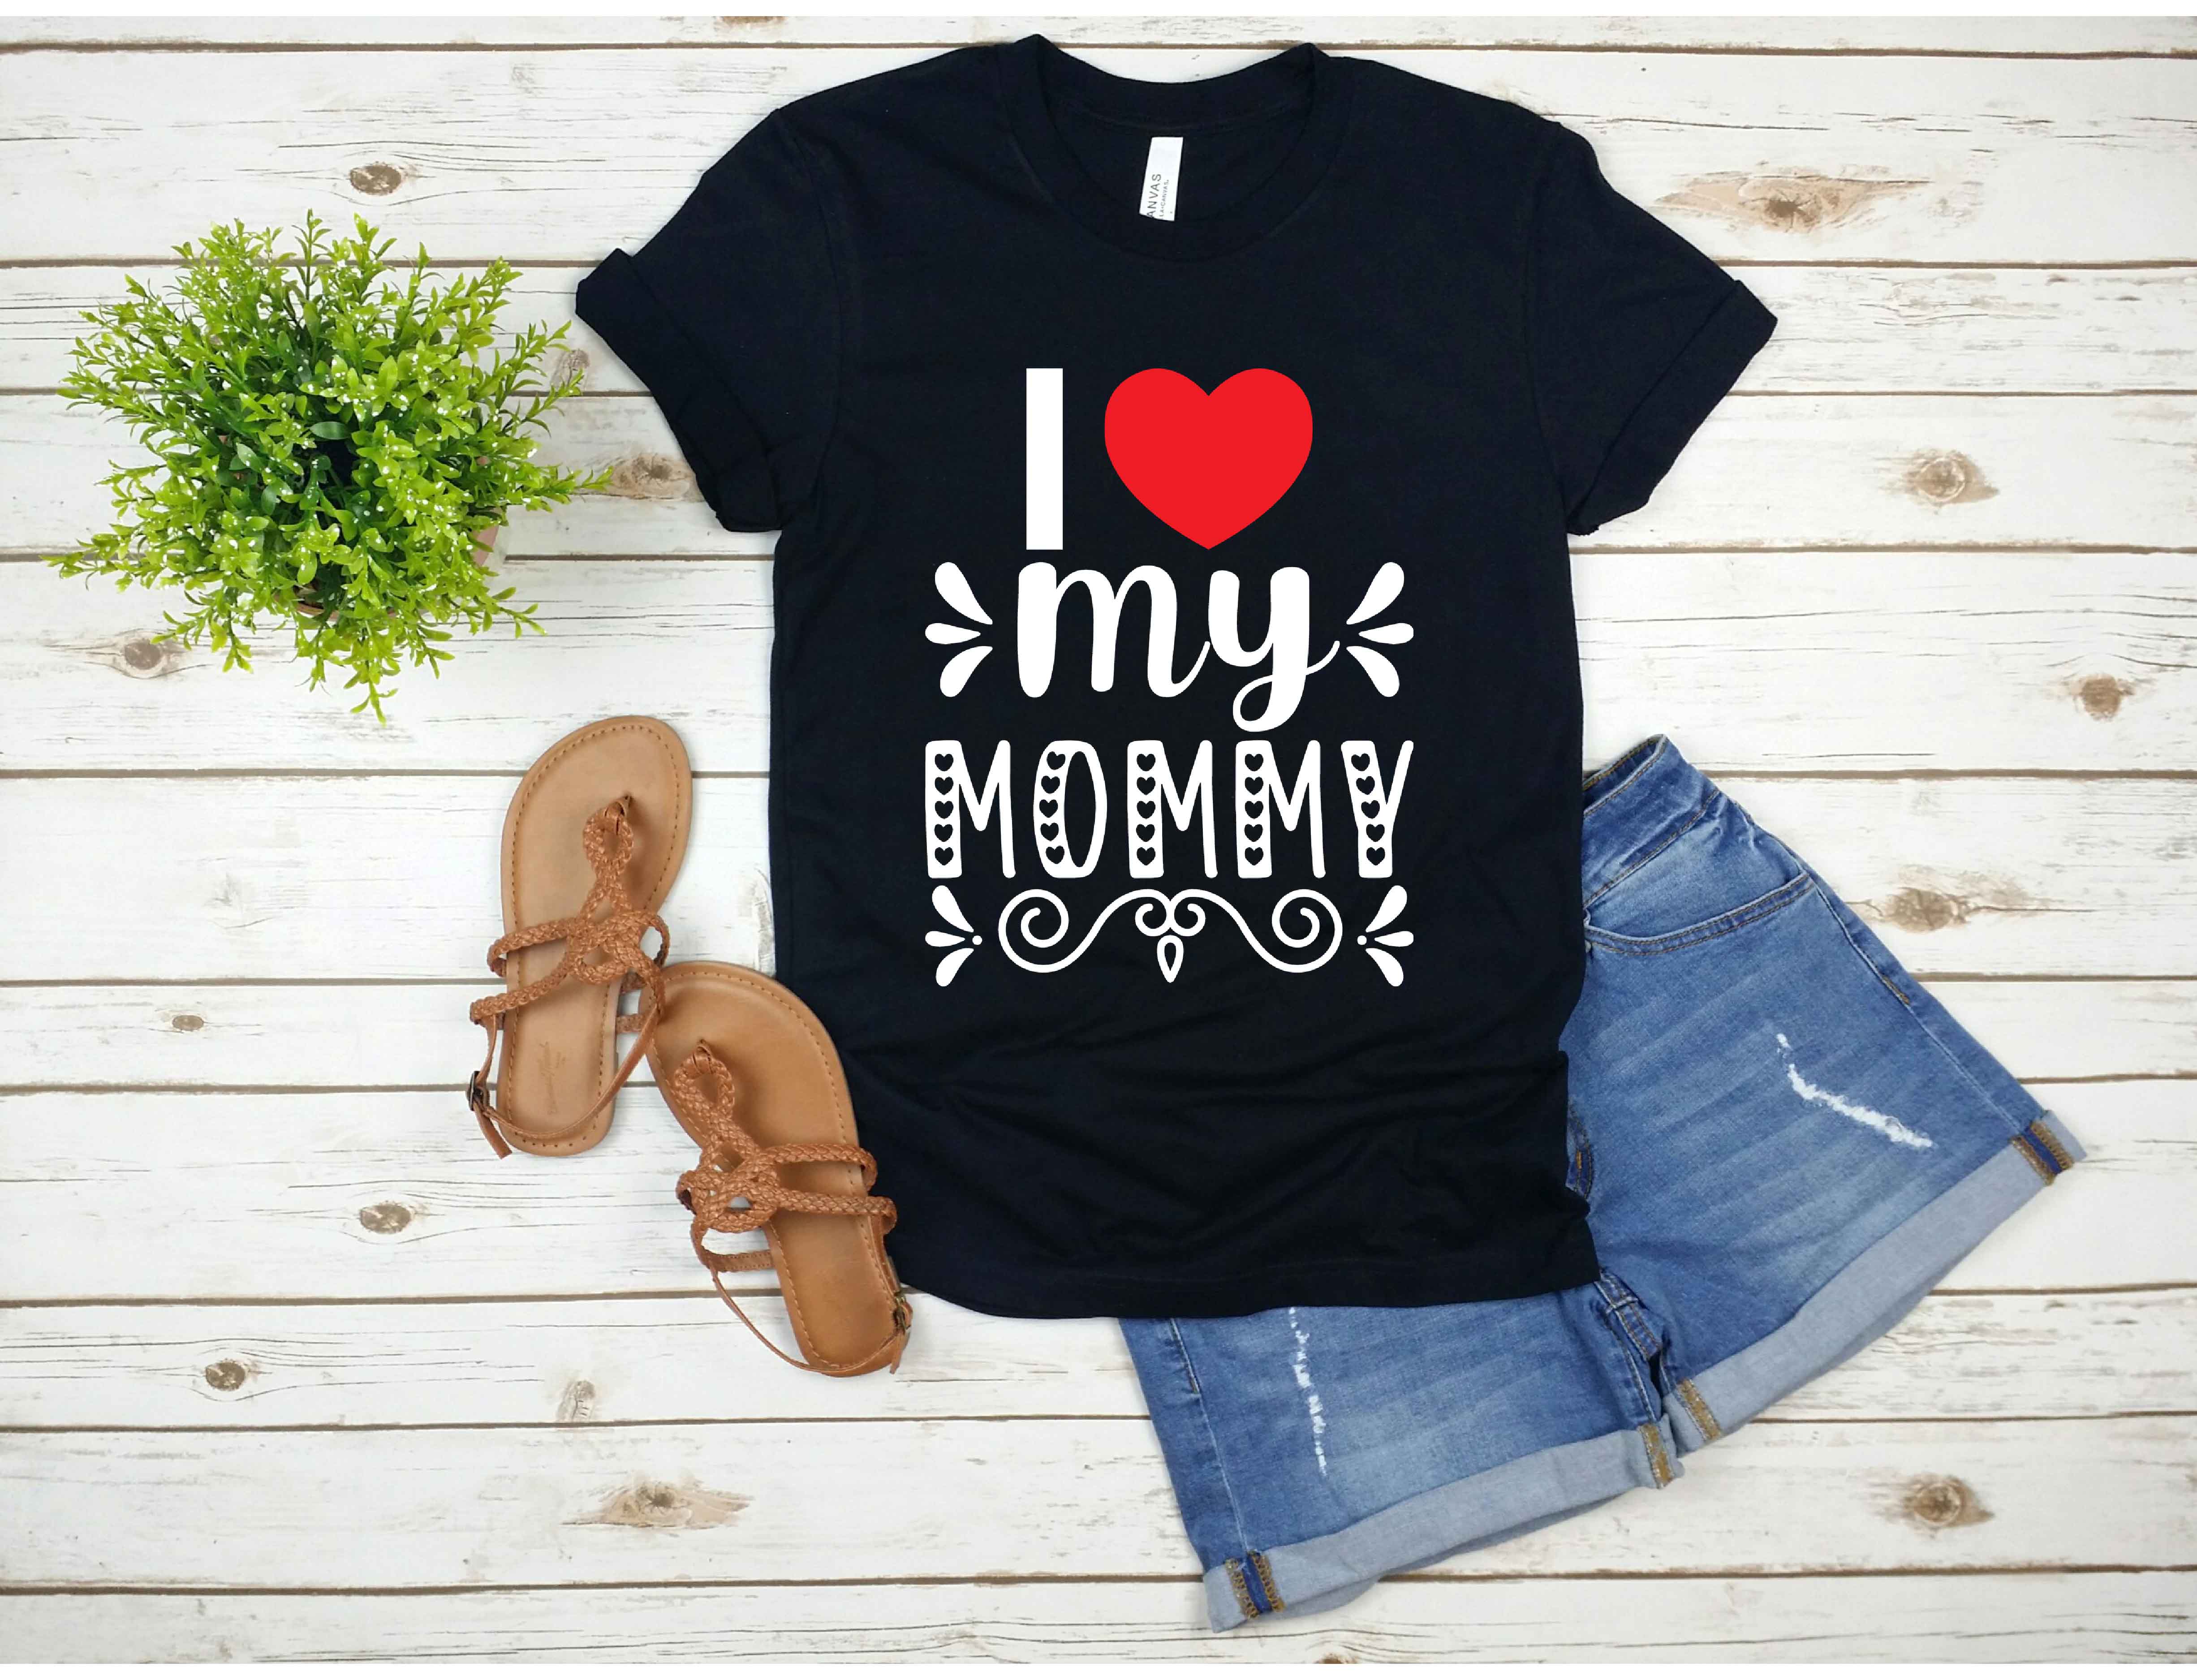 T - shirt that says i love my mommy.